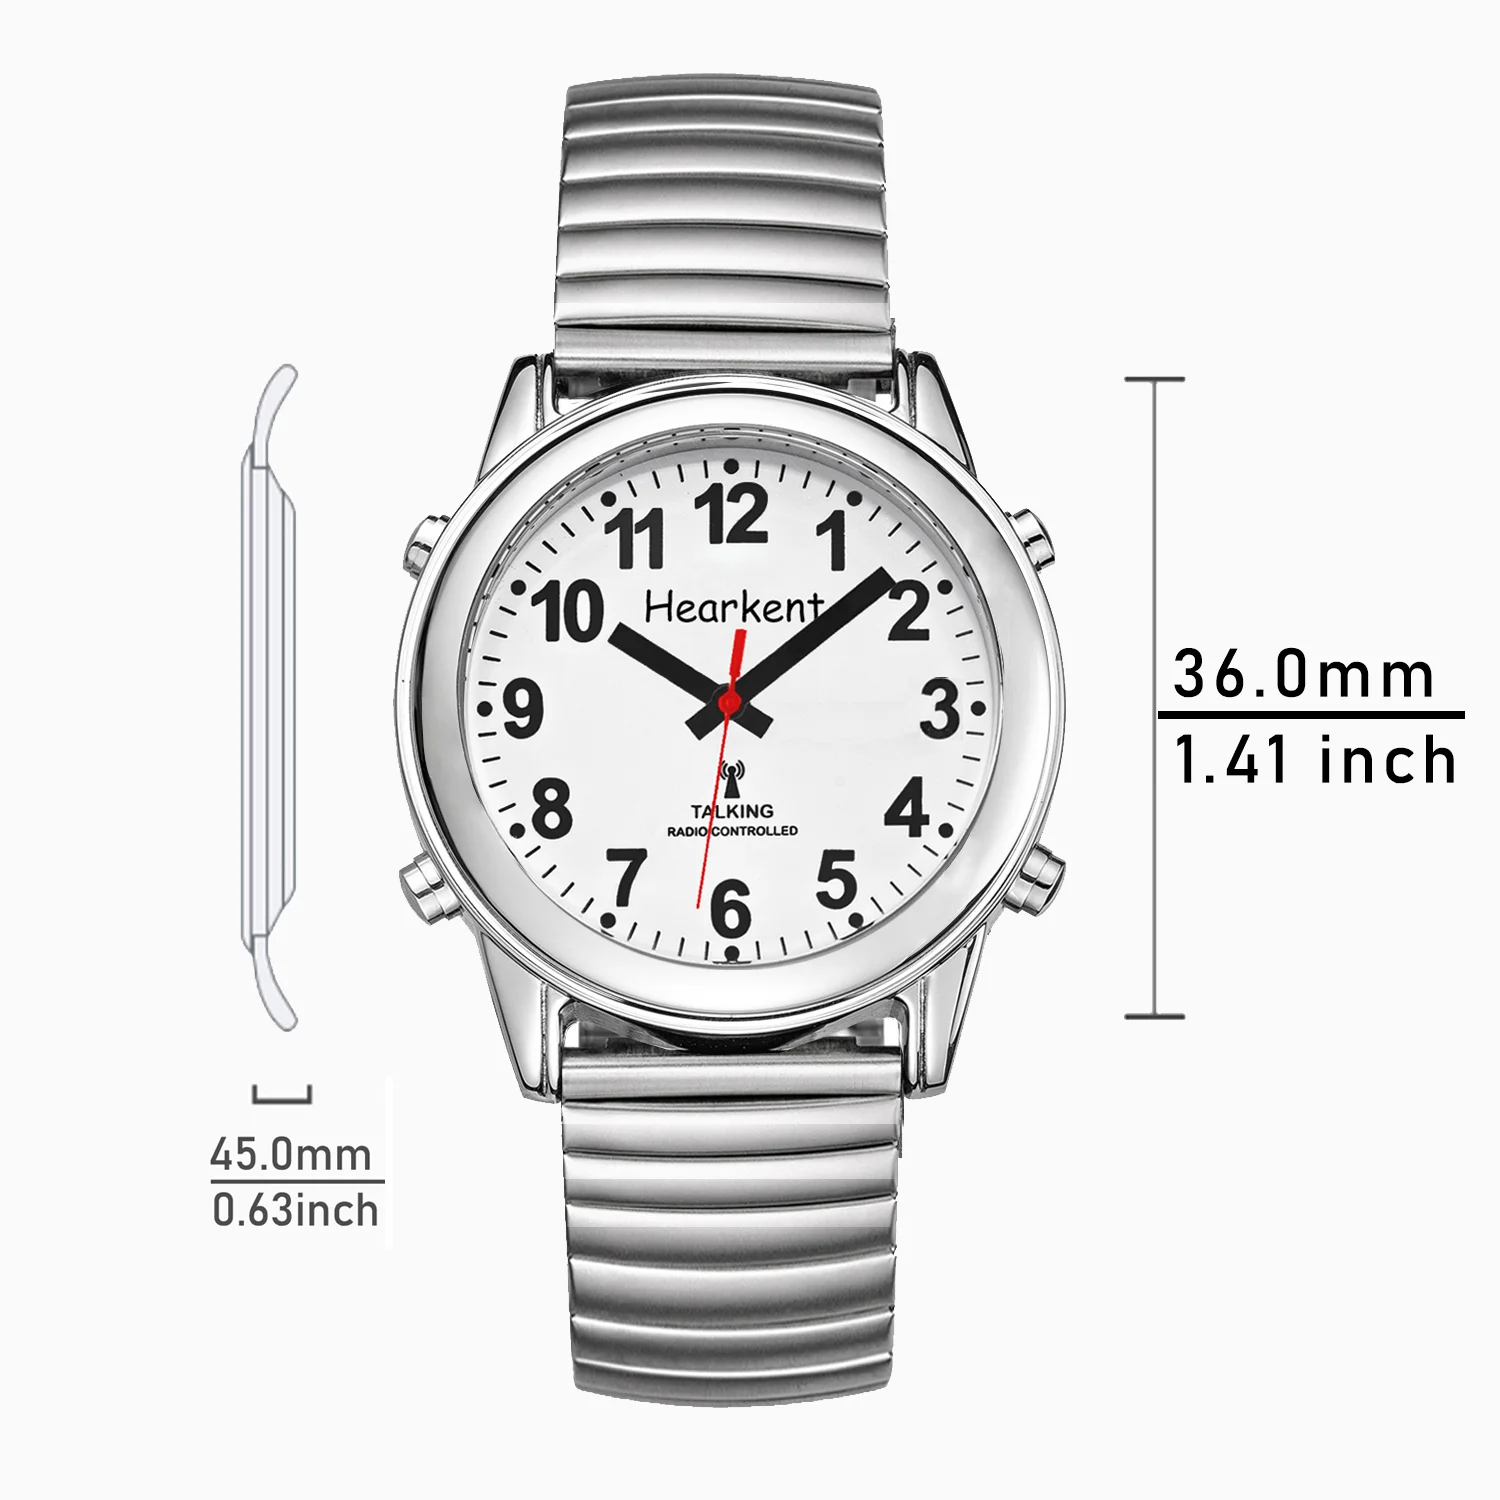 Hearkent Atomic American English Talking Watch Stainless Steel Stretch Band  Best Gift for Senior,Visually Impaired or Blind People 